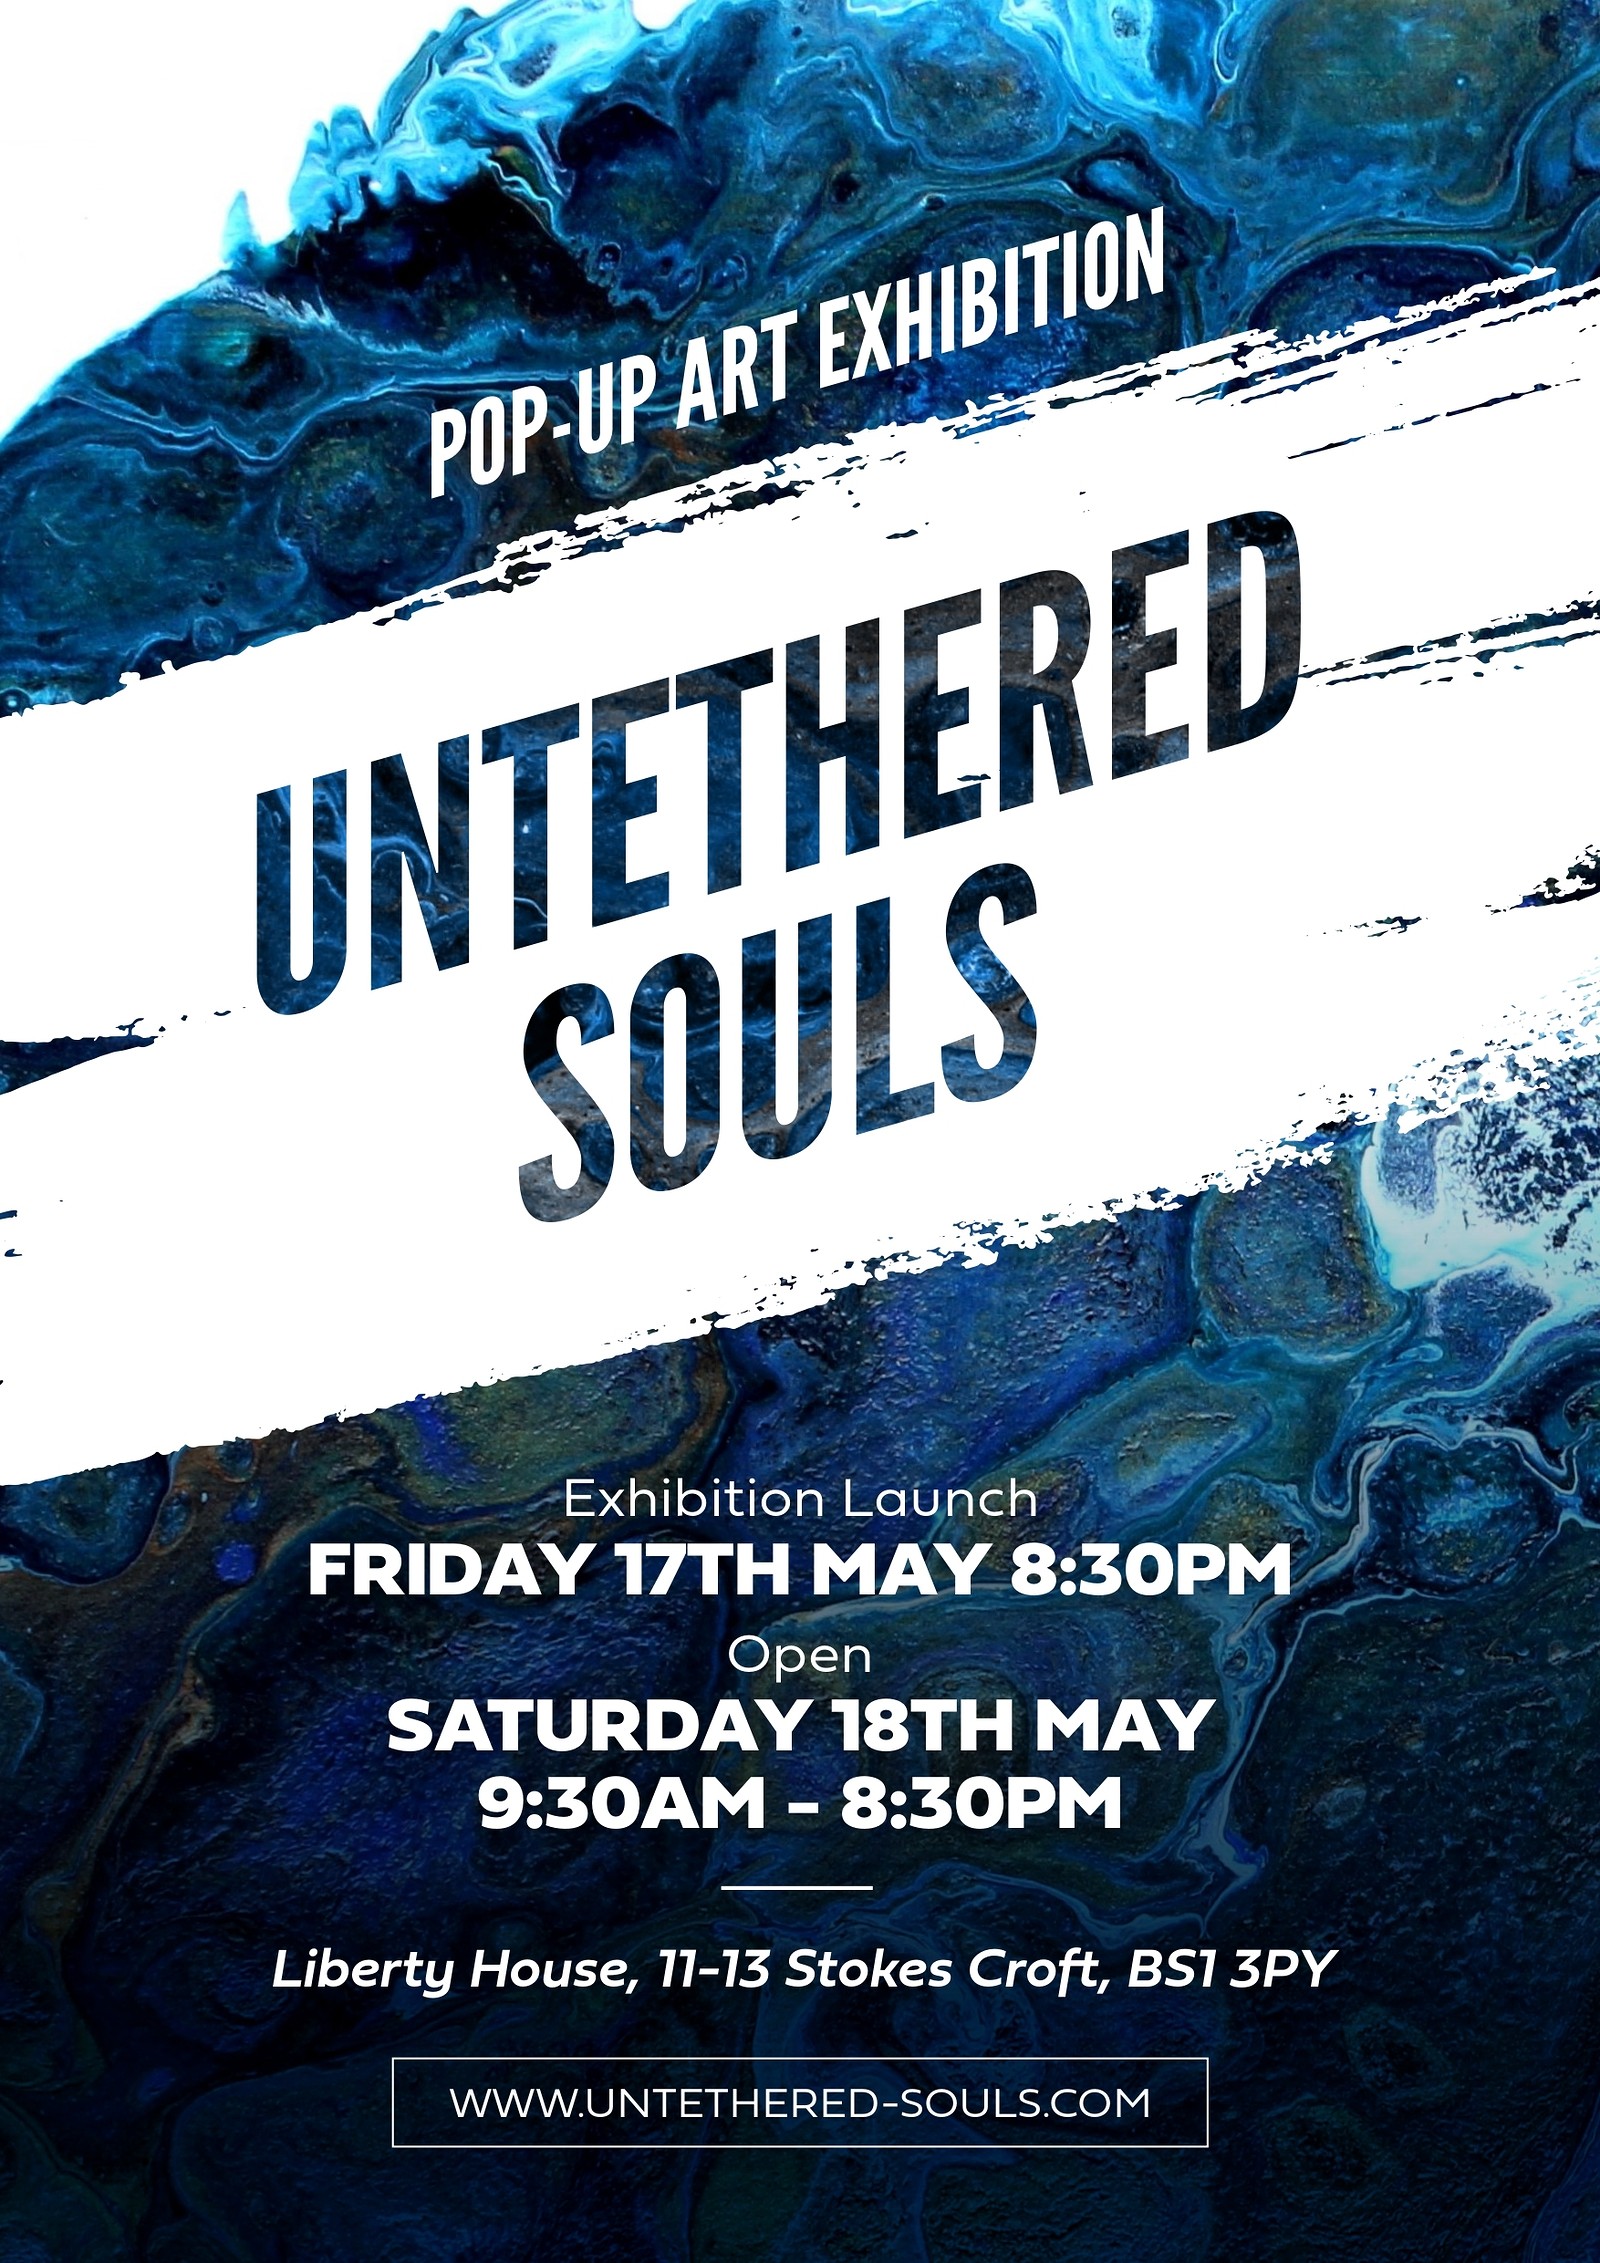 'Untethered Souls' - Exploring Freedom through art at Liberty House 11/13 Stokes Croft